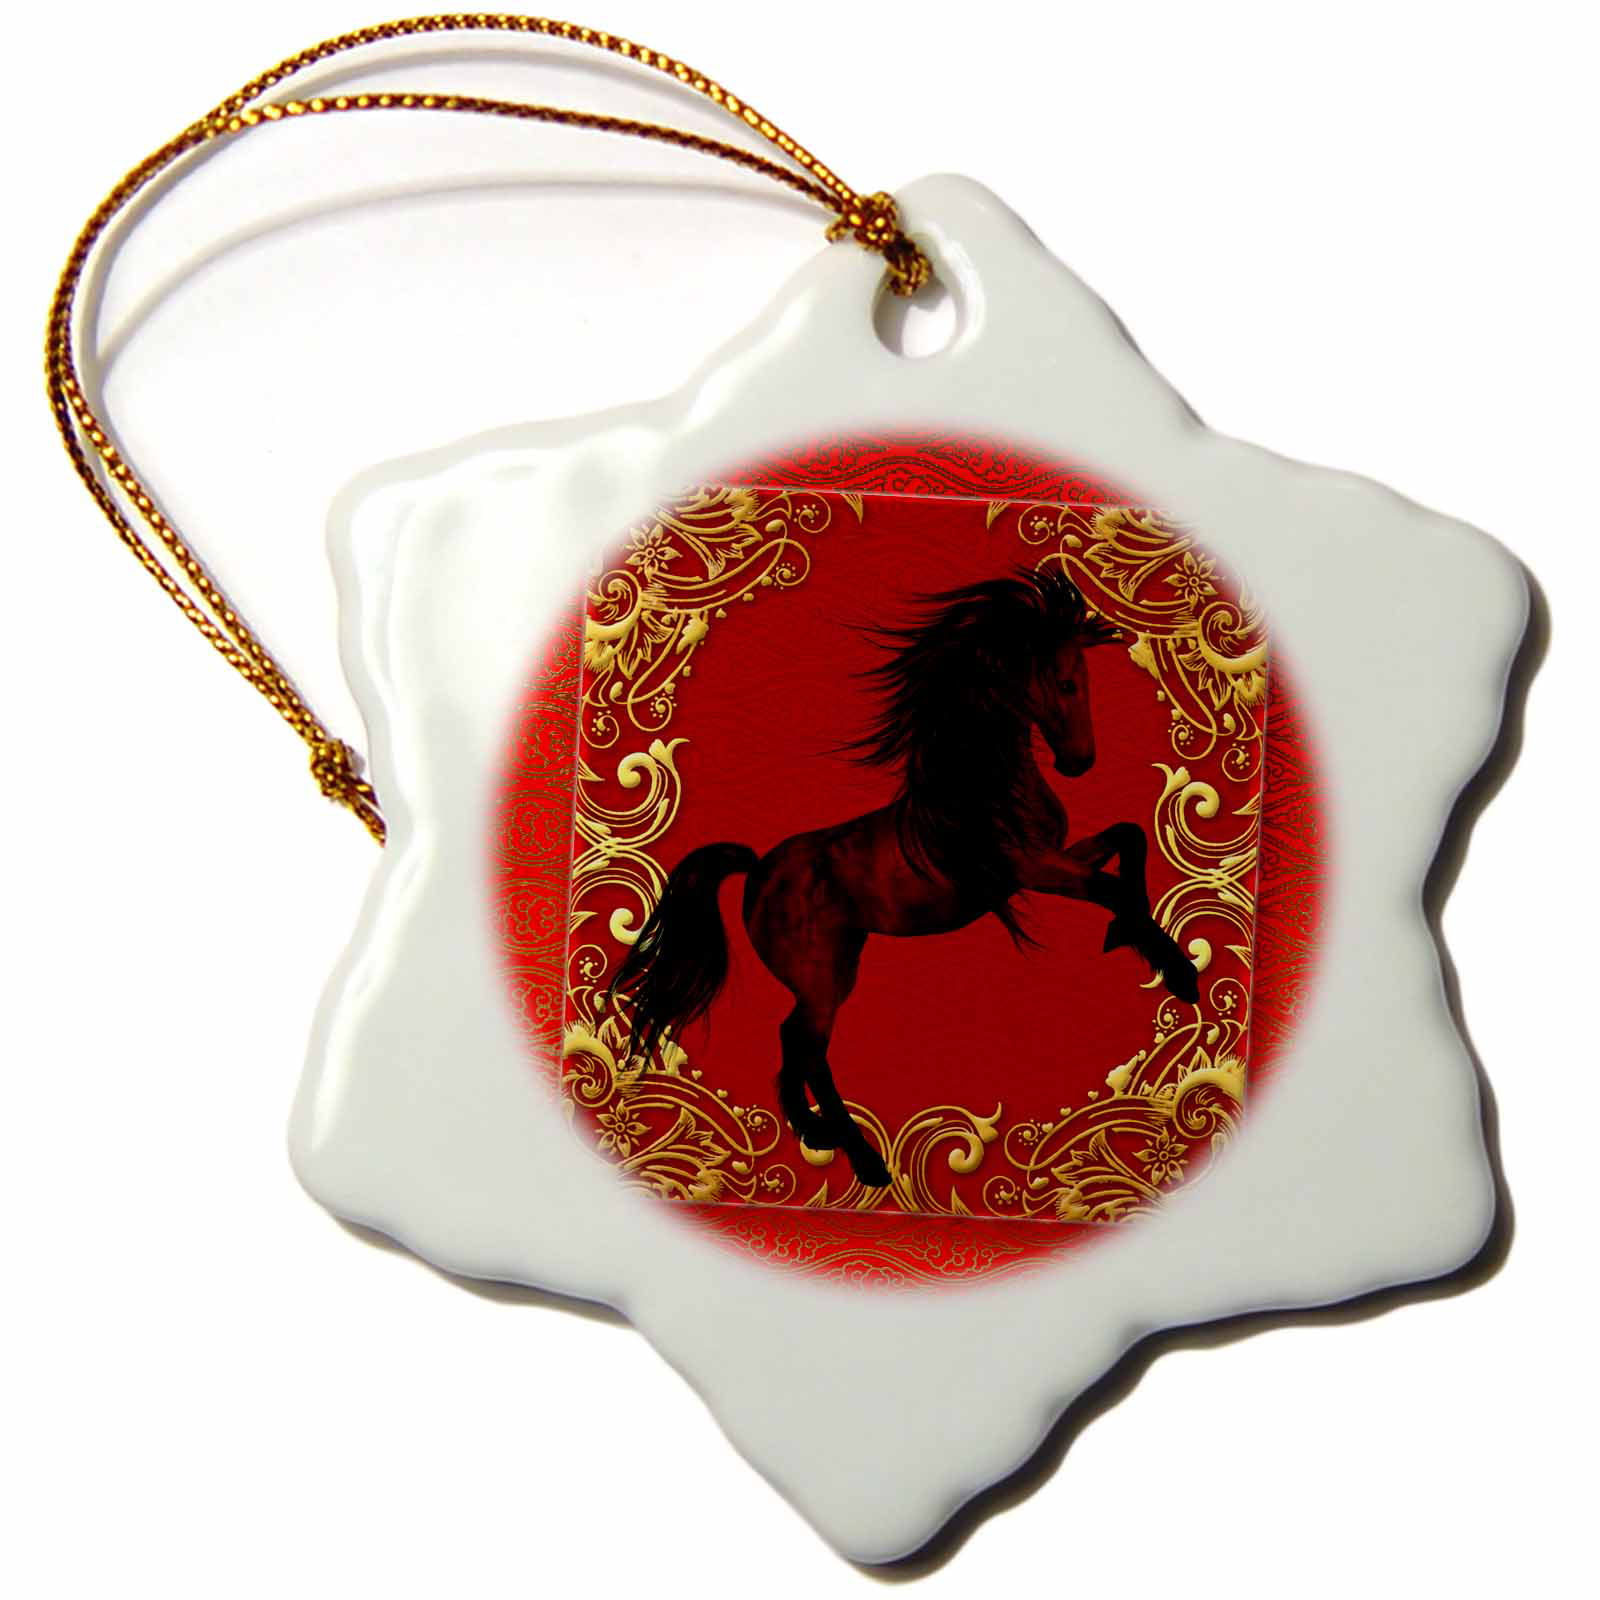 3-Inch Porcelain Gold and Black-Snowflake Ornament 3dRose ORN_101846_1 Chinese Zodiac Year of The Horse Chinese New Year Red